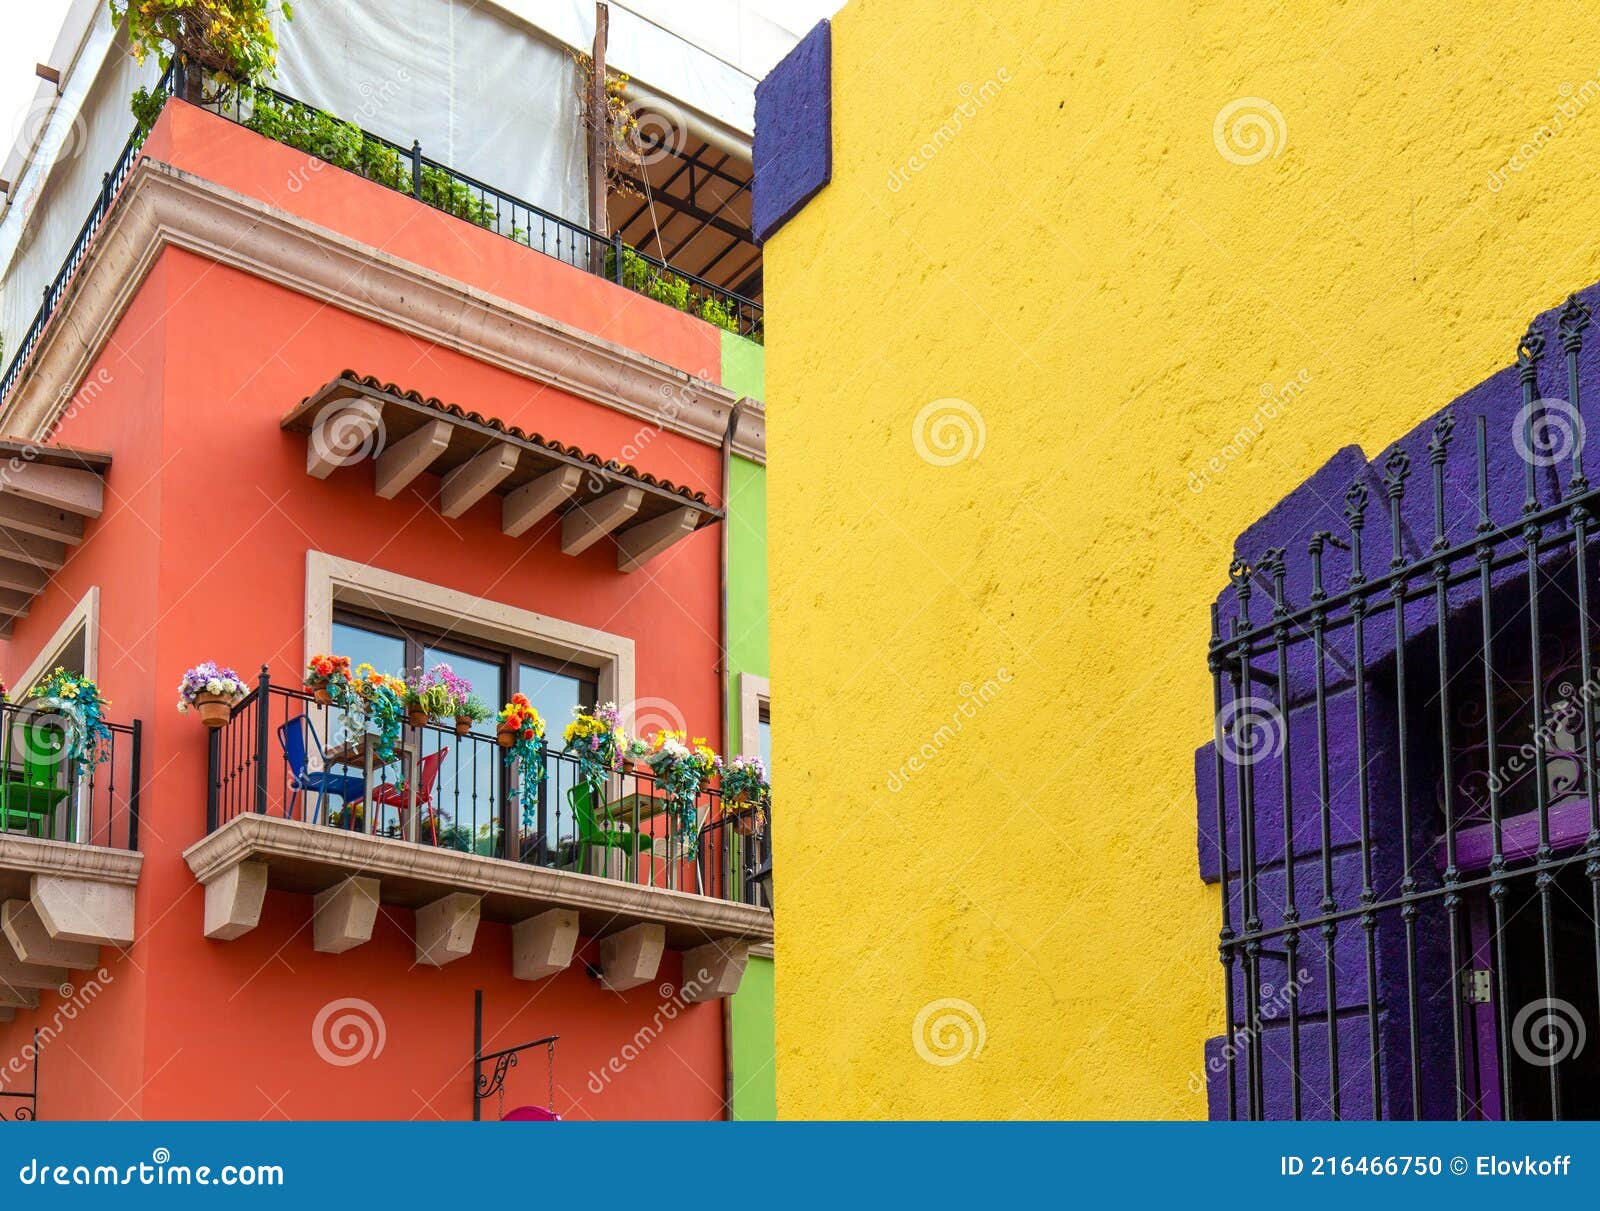 mexico, monterrey, colorful historic buildings in the center of the old city, barrio antiguo, a famous tourist